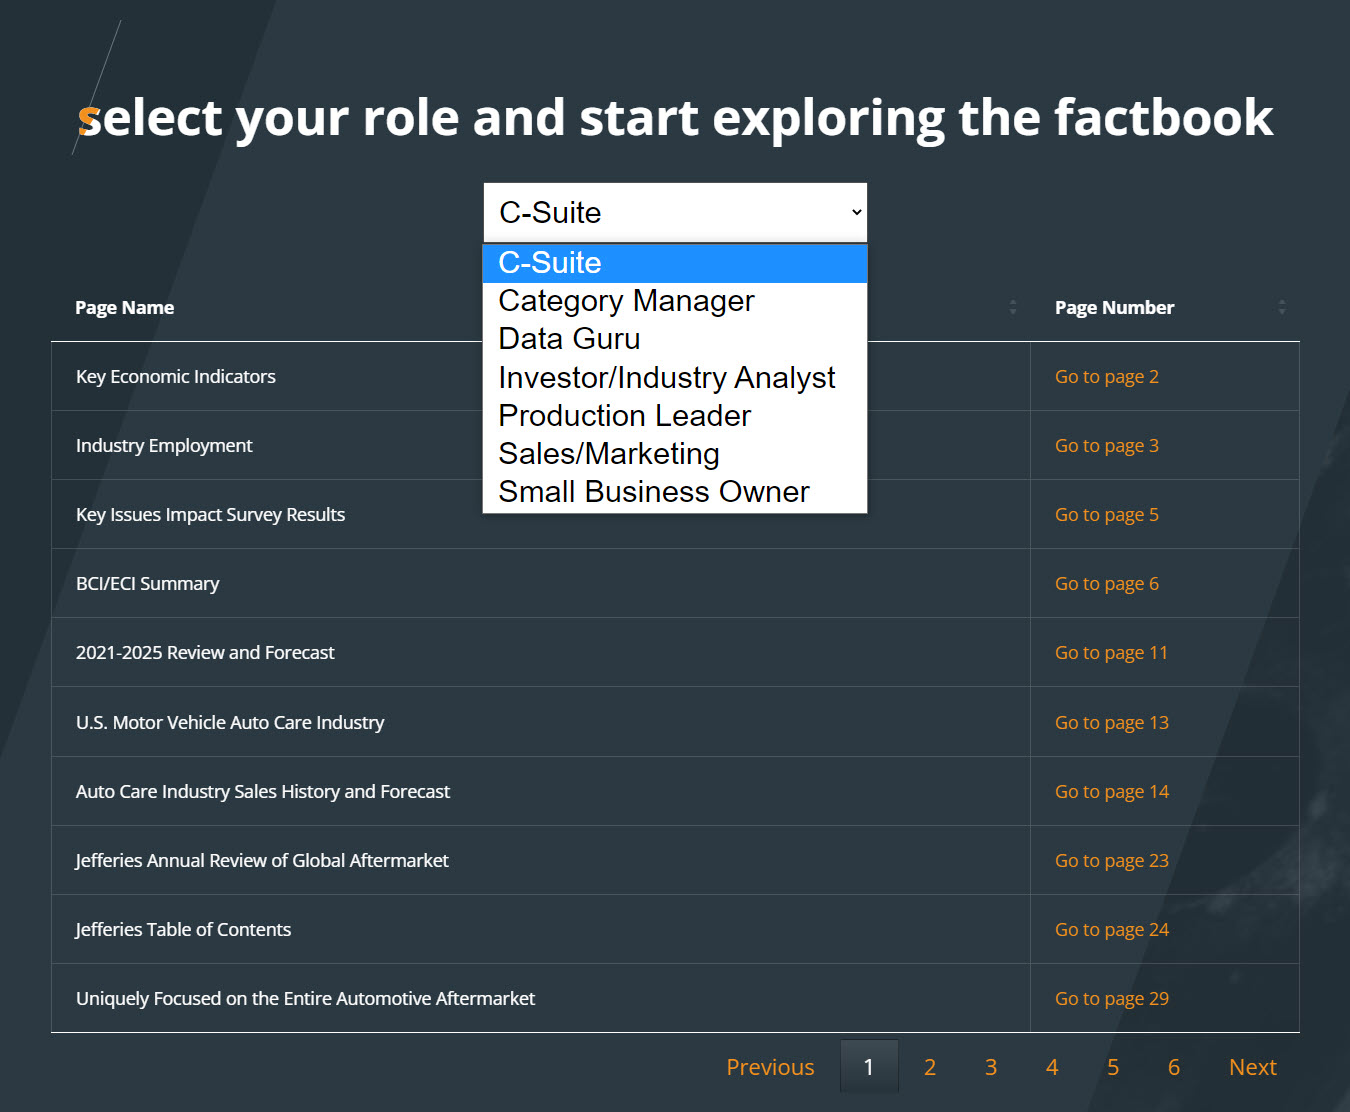 select your role to explore factbook